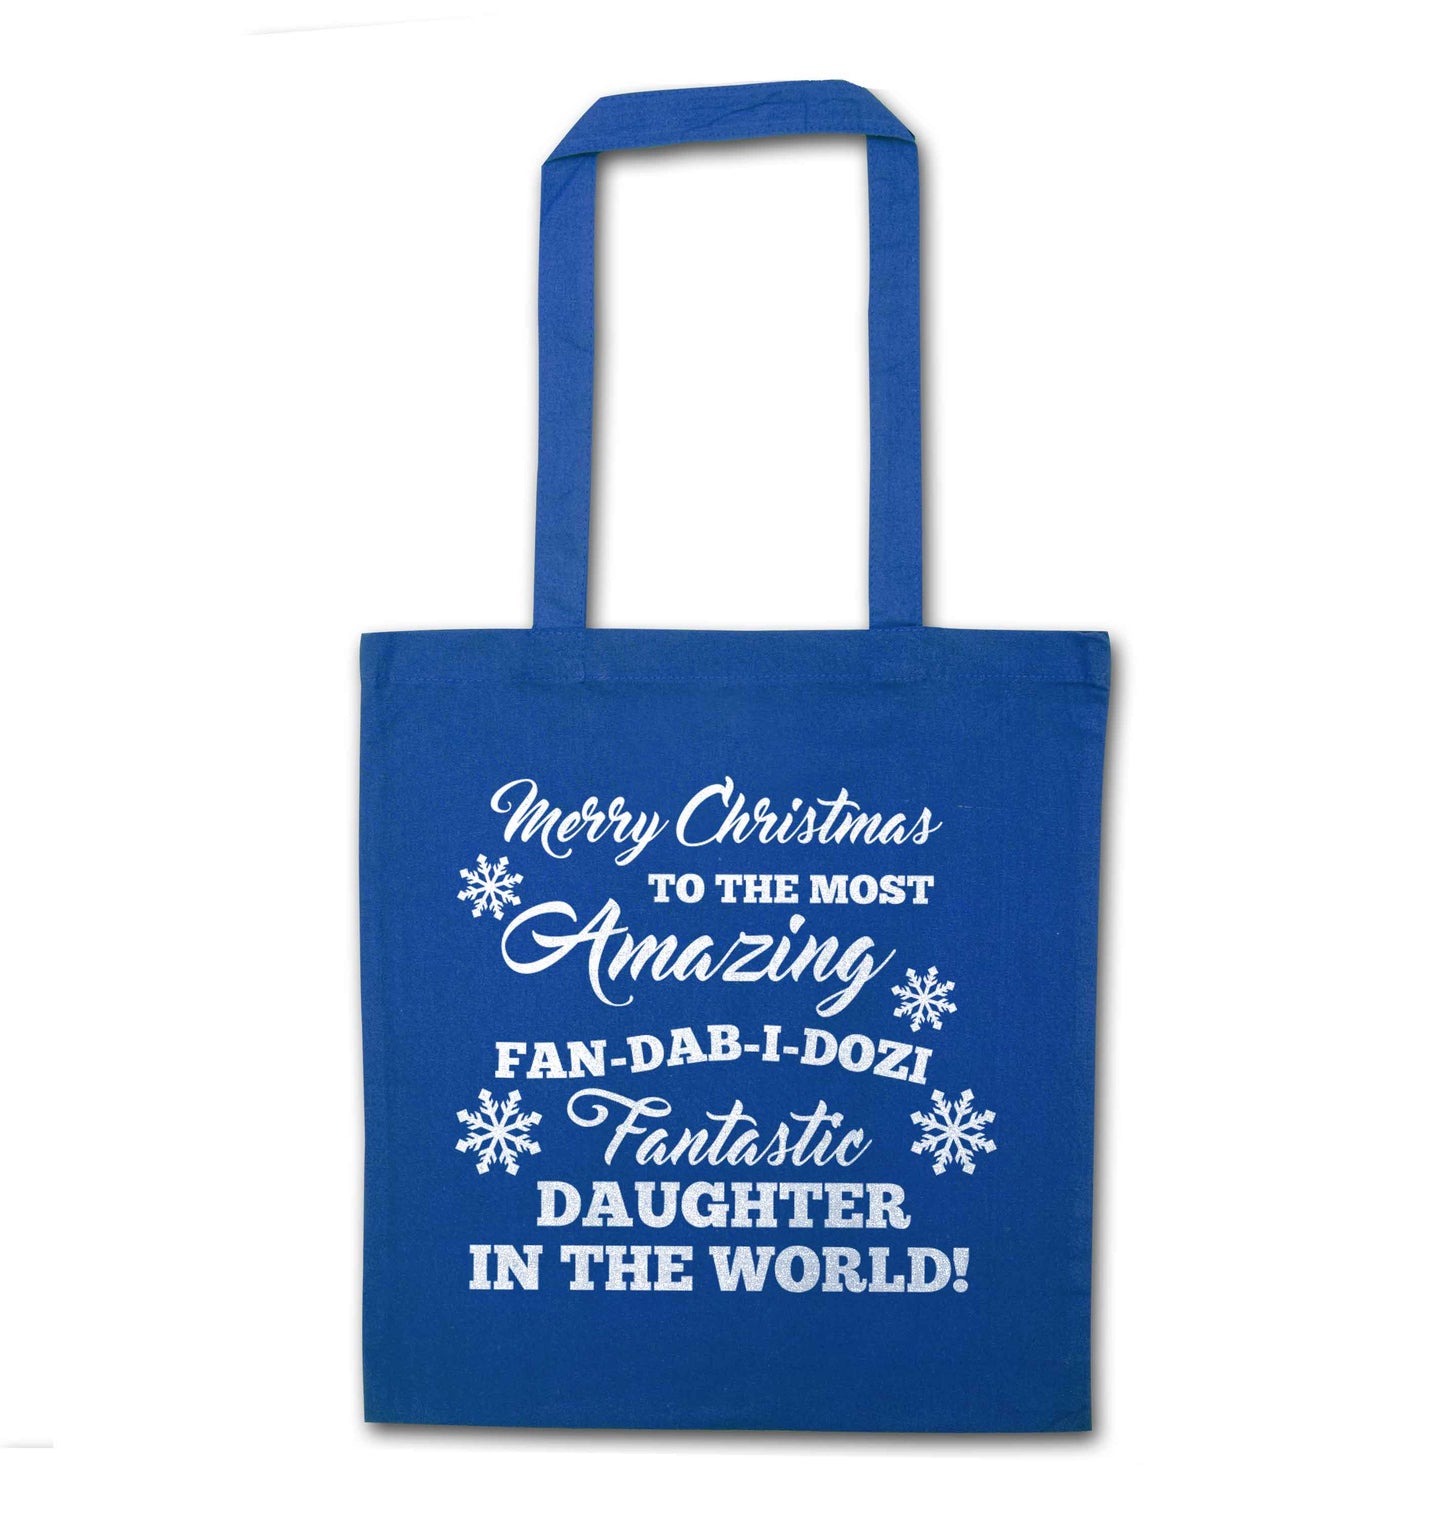 Merry Christmas to the most amazing fan-dab-i-dozi fantasic Daughter in the world blue tote bag